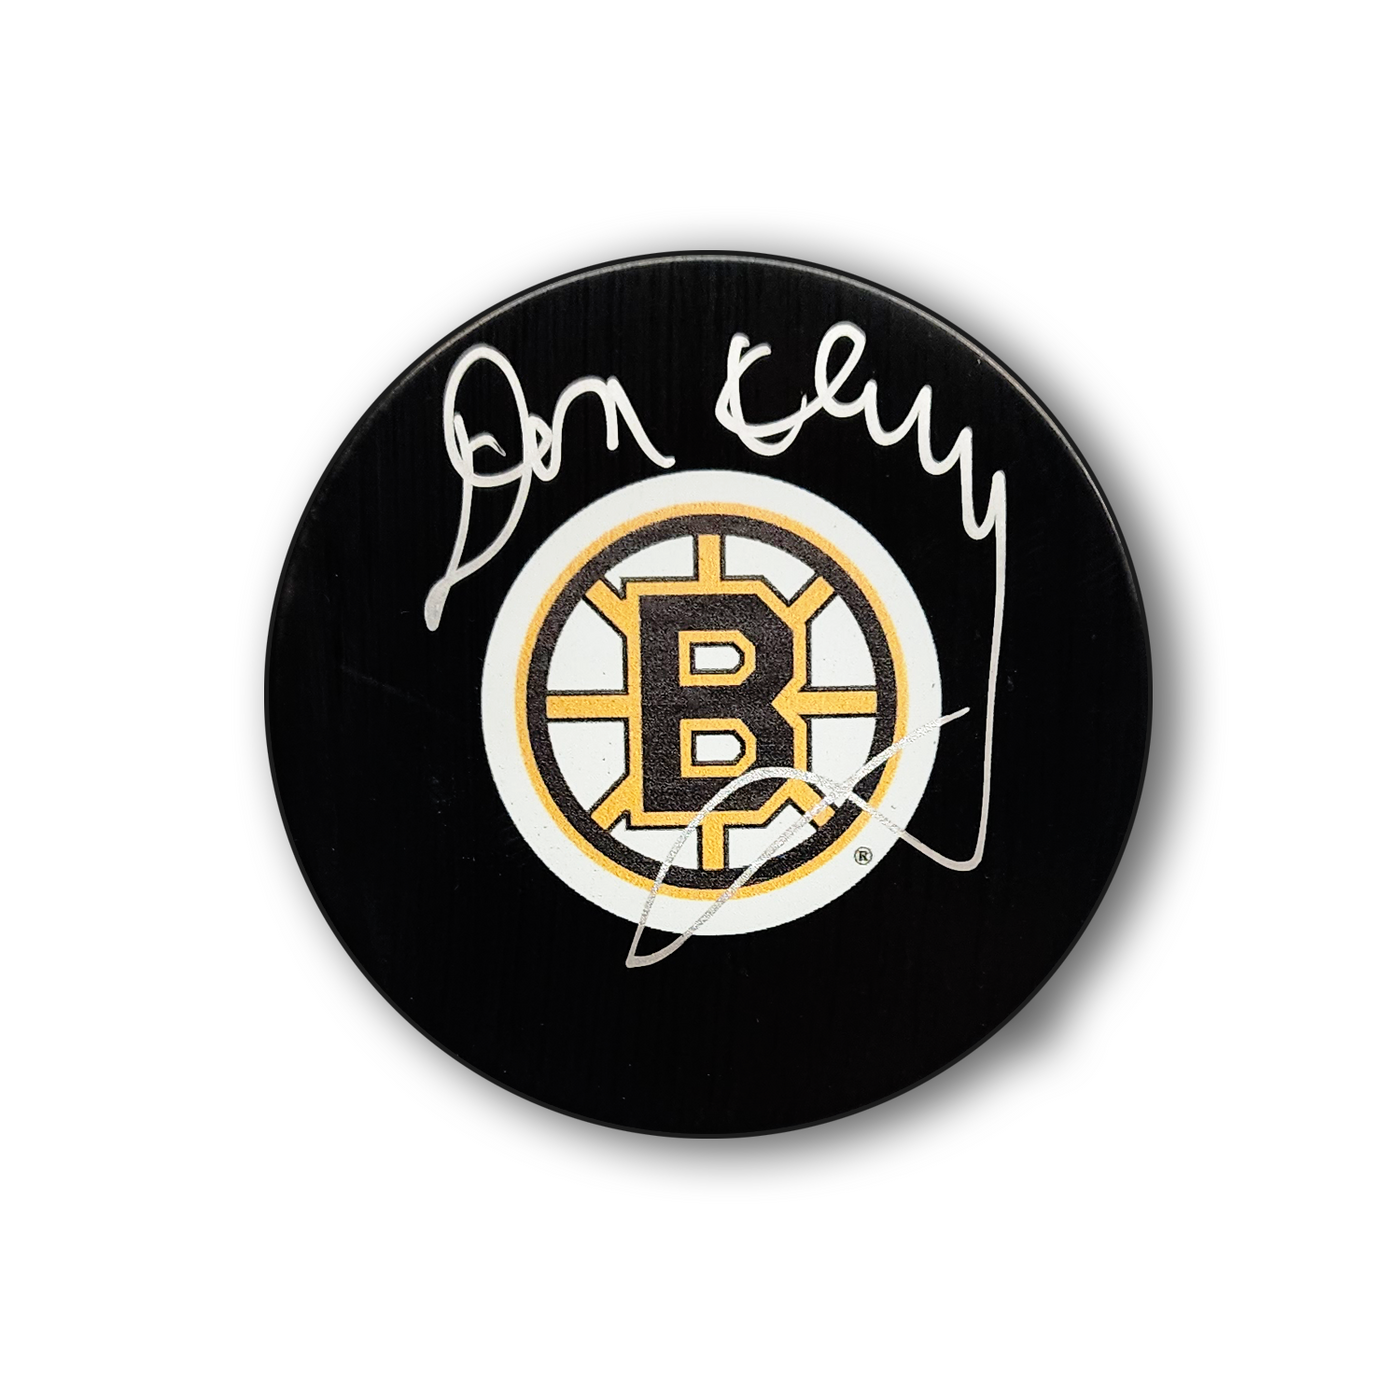 Don Cherry Autographed Boston Bruins Hockey Puck